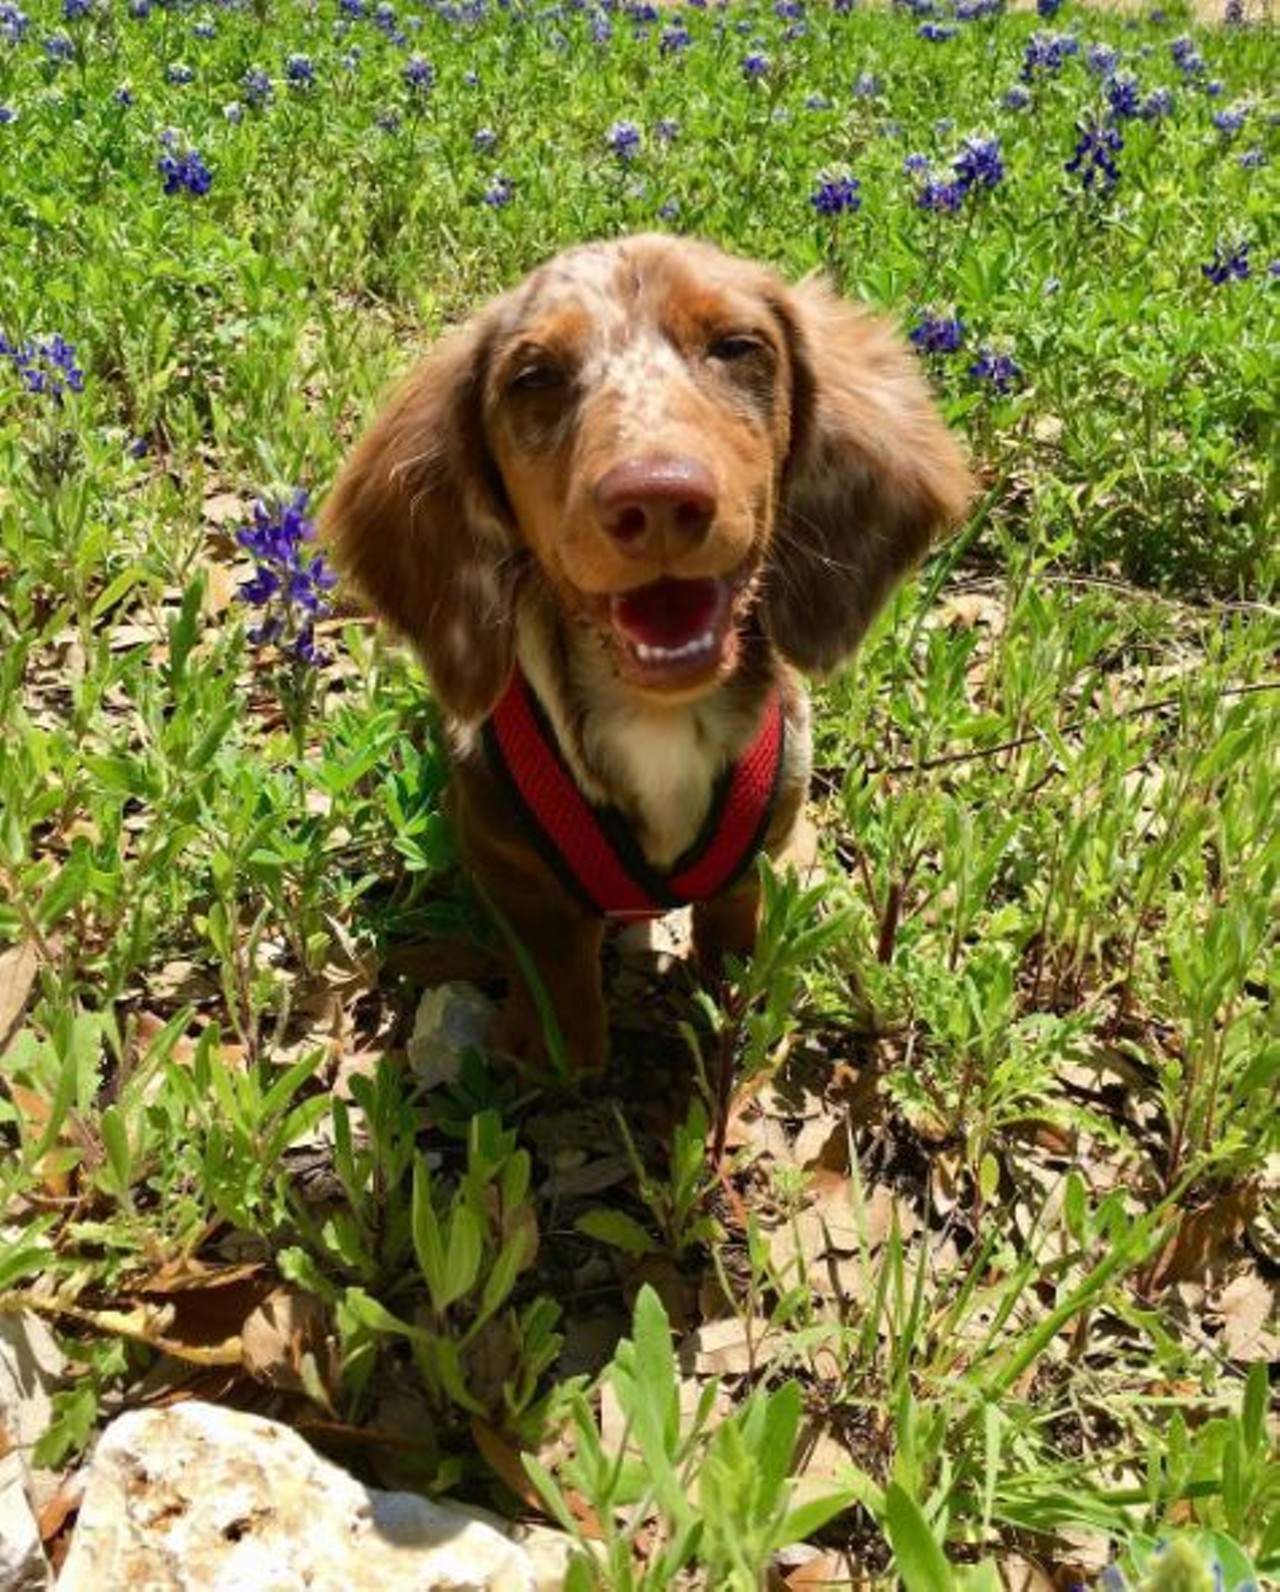 Take the pups to Phil Hardberger Park
13203 Blanco Road, (210) 492-7472, philhardbergerpark.org
Because how could you ever leave this cutie at home?
Photo via Instagram, dex_dachshund